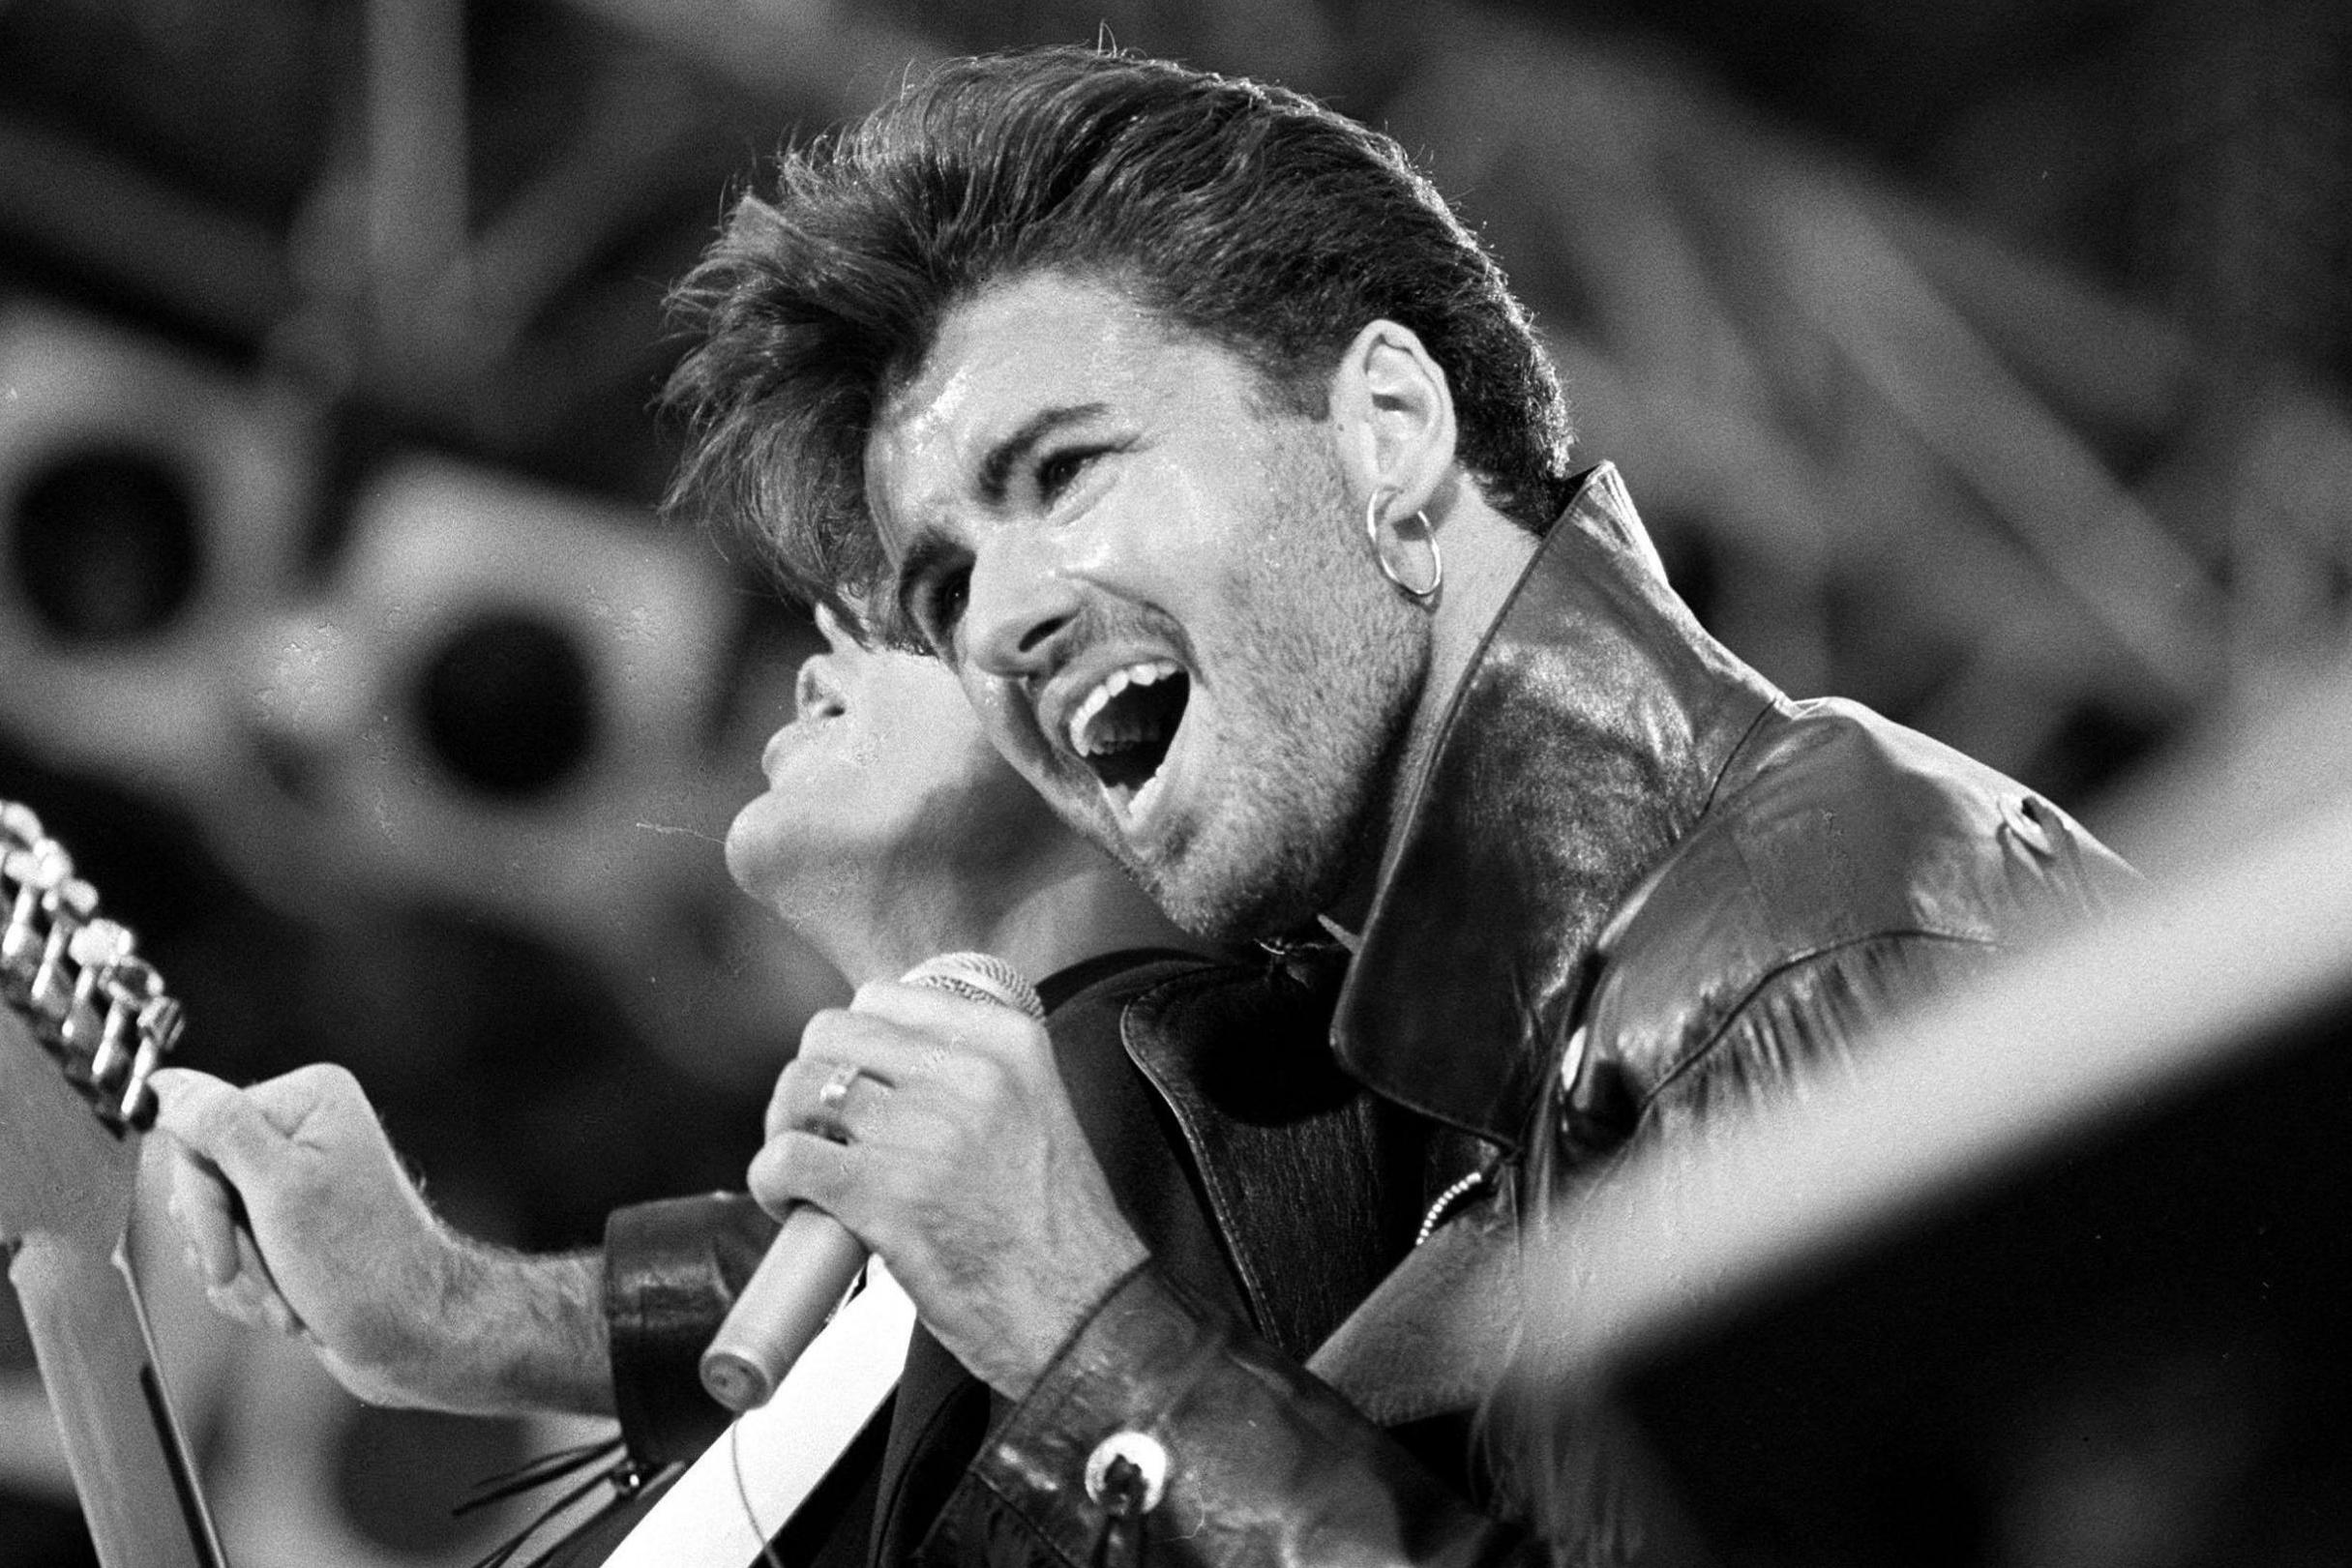 George Michael net worth is rumoured to be near £100 million